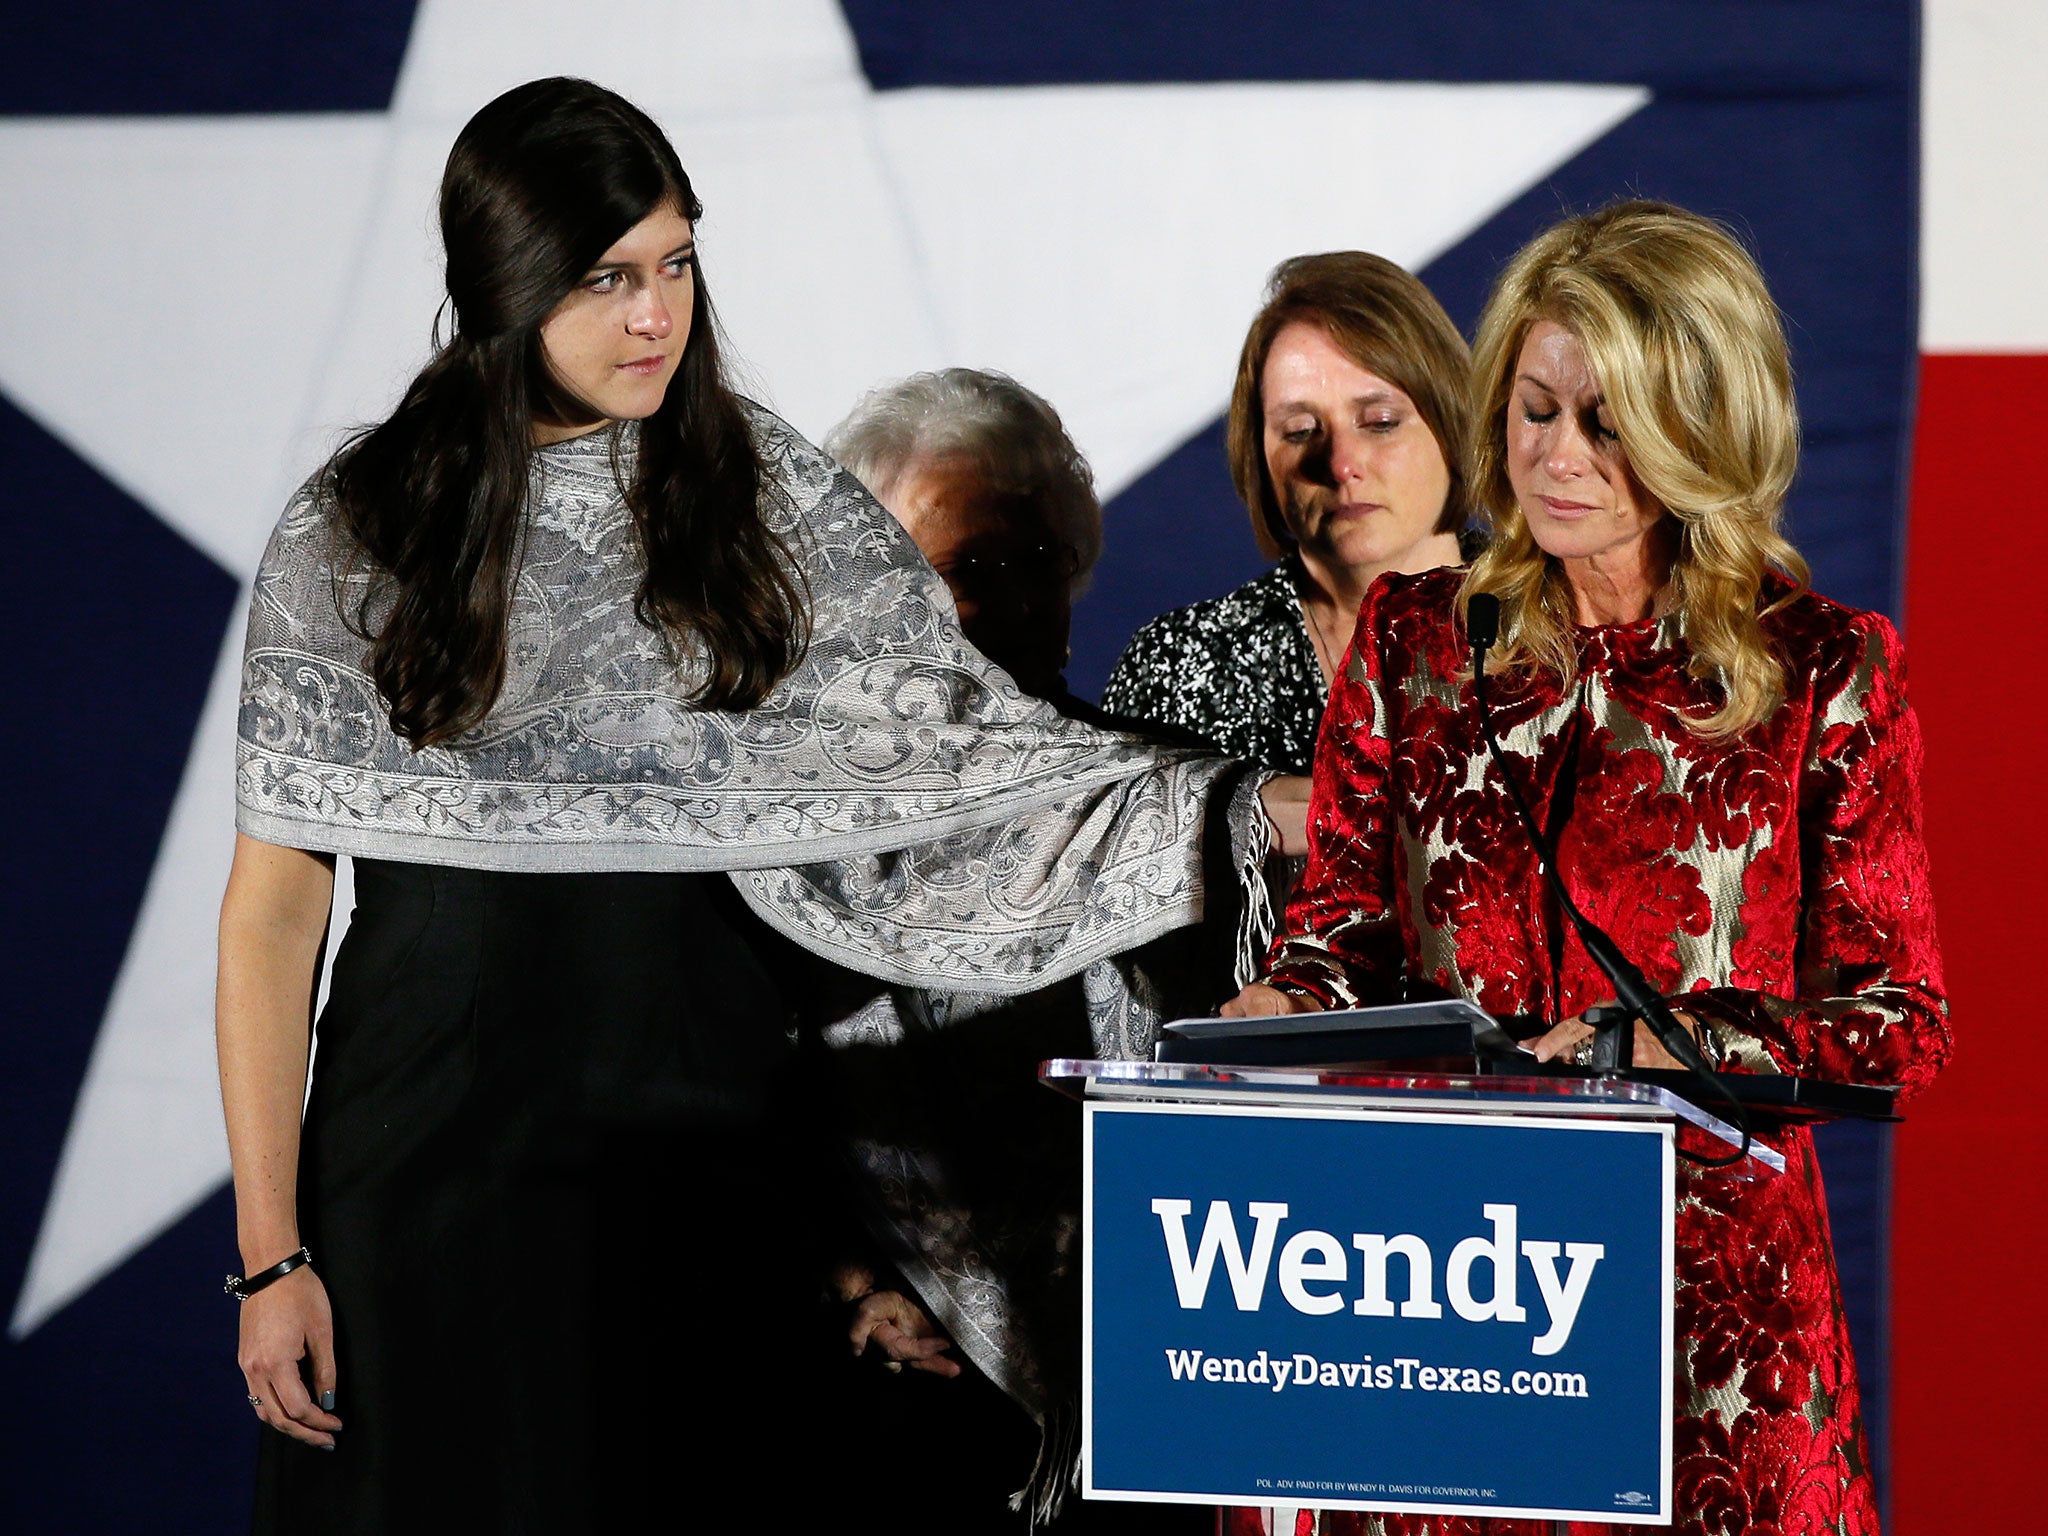 Dru Davis, daughter of Texas Democratic gubernatorial candidate Wendy Davis, consoles her mother as she makes her concession speech in Fort Worth, Texas